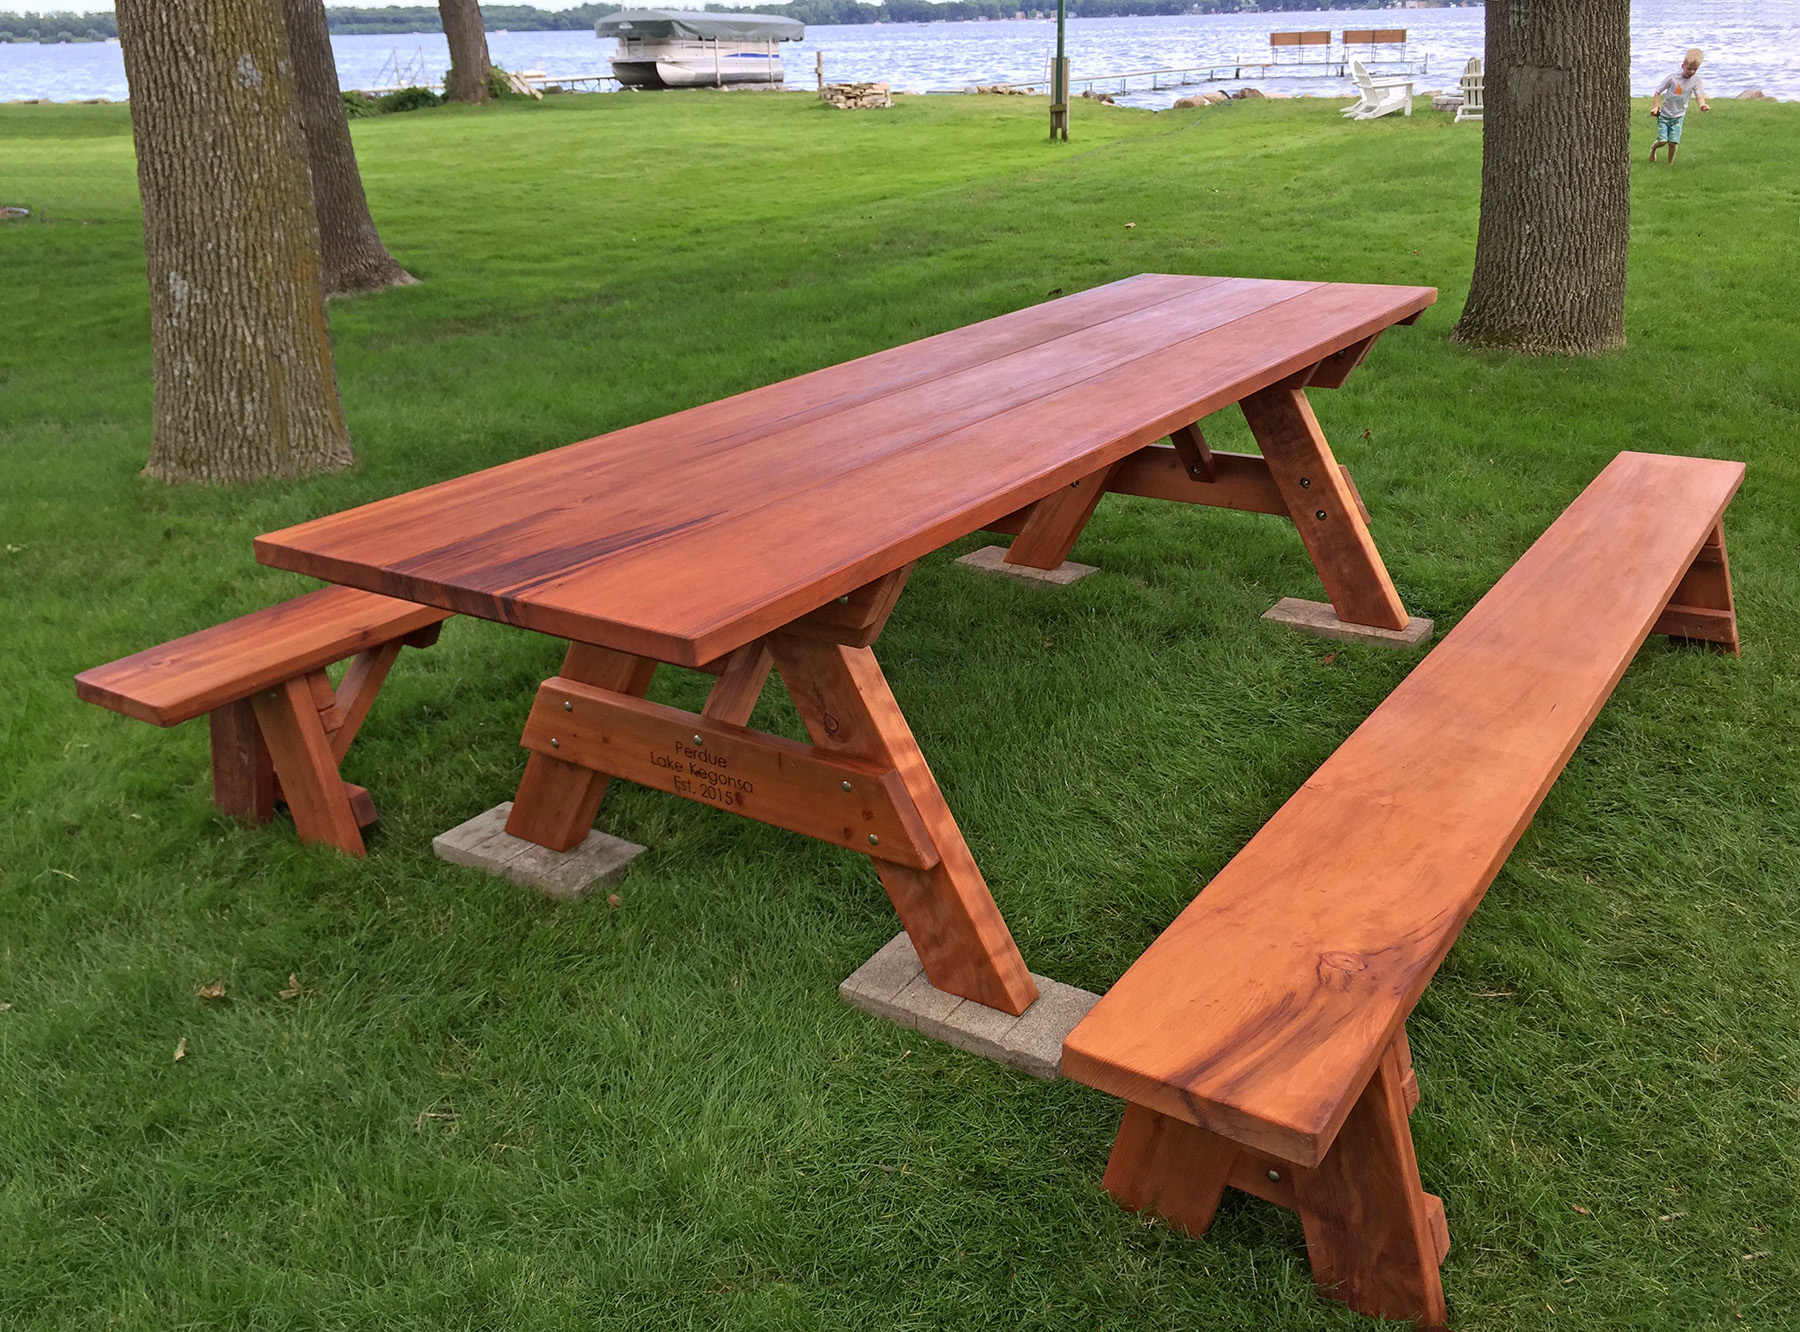 Wood for picnic table